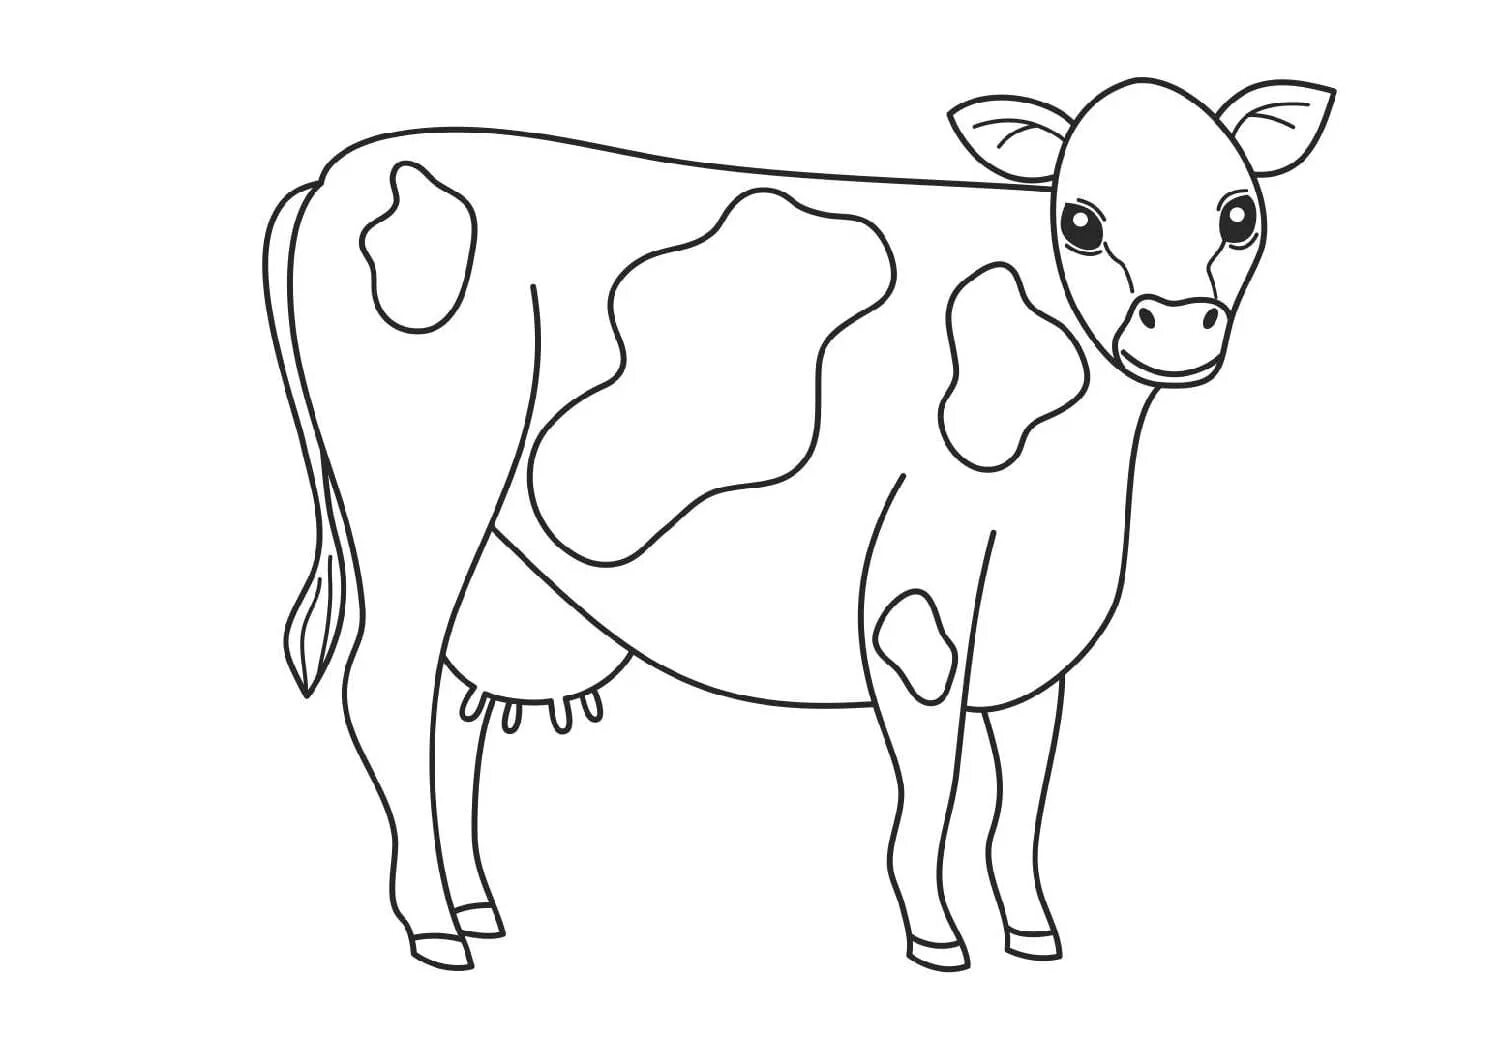 Coloring book funny cow for children 5-6 years old